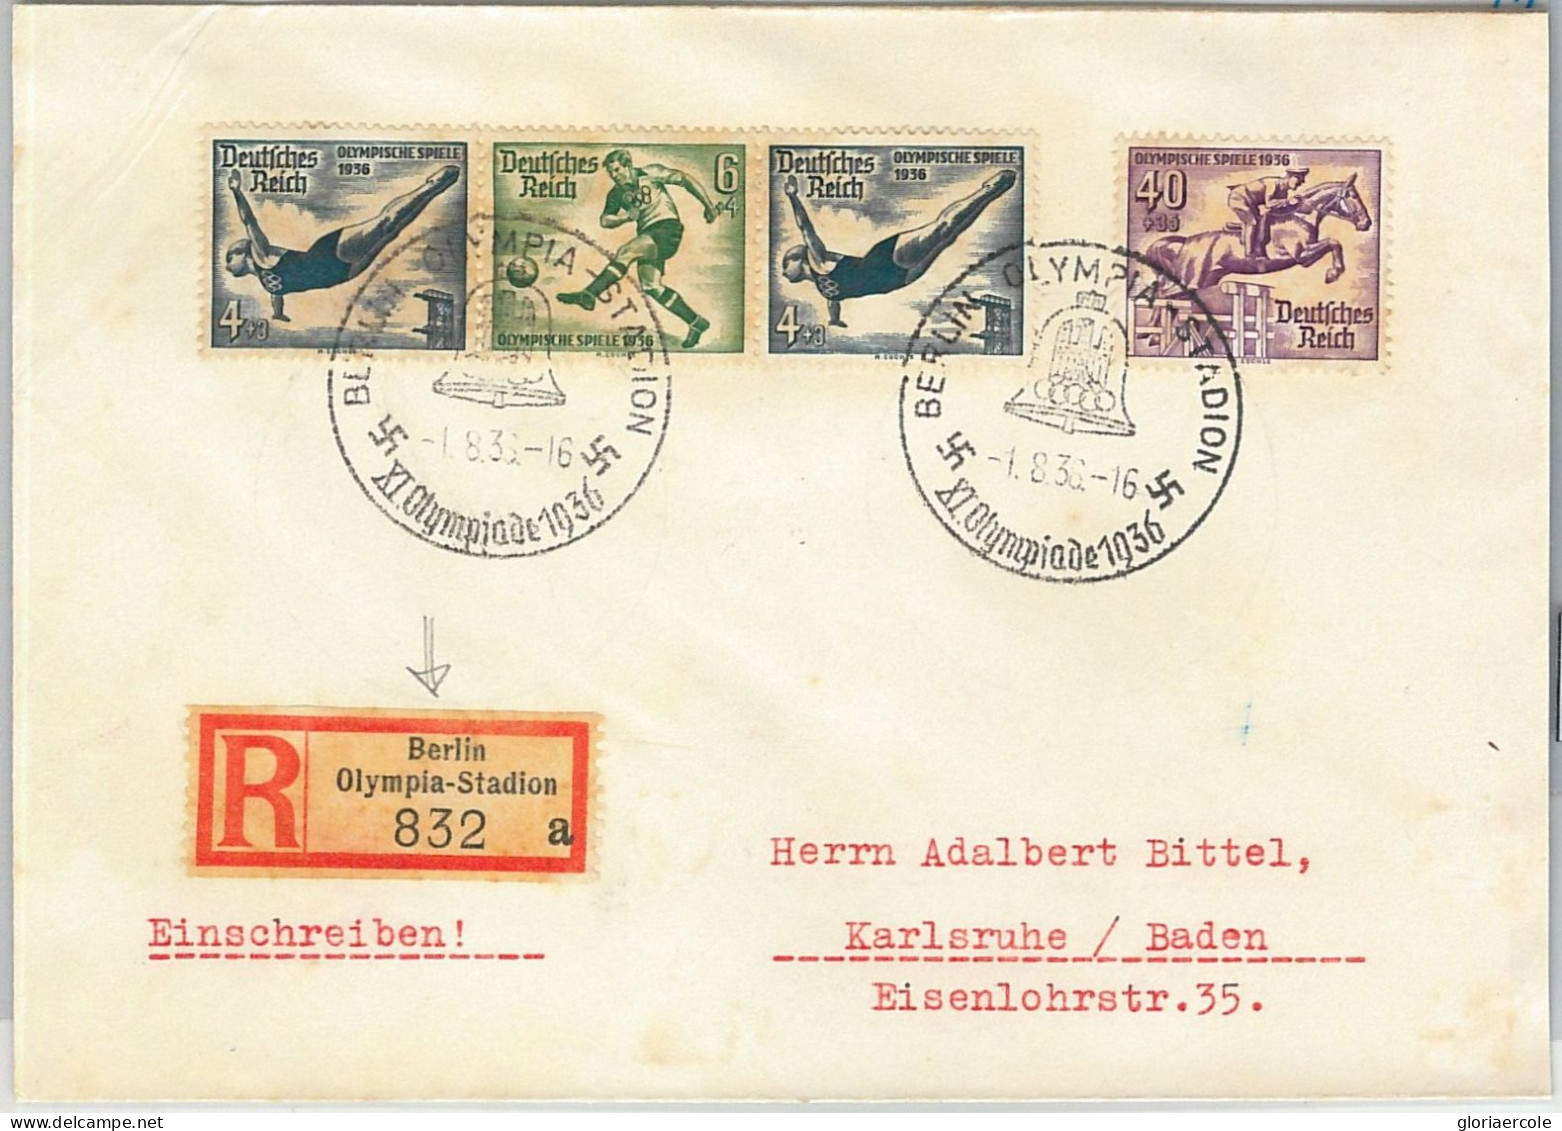 59958 - GERMANY - POSTAL HISTORY - REGISTERED COVER: OLYMPIC GAMES 1936 - Sommer 1936: Berlin